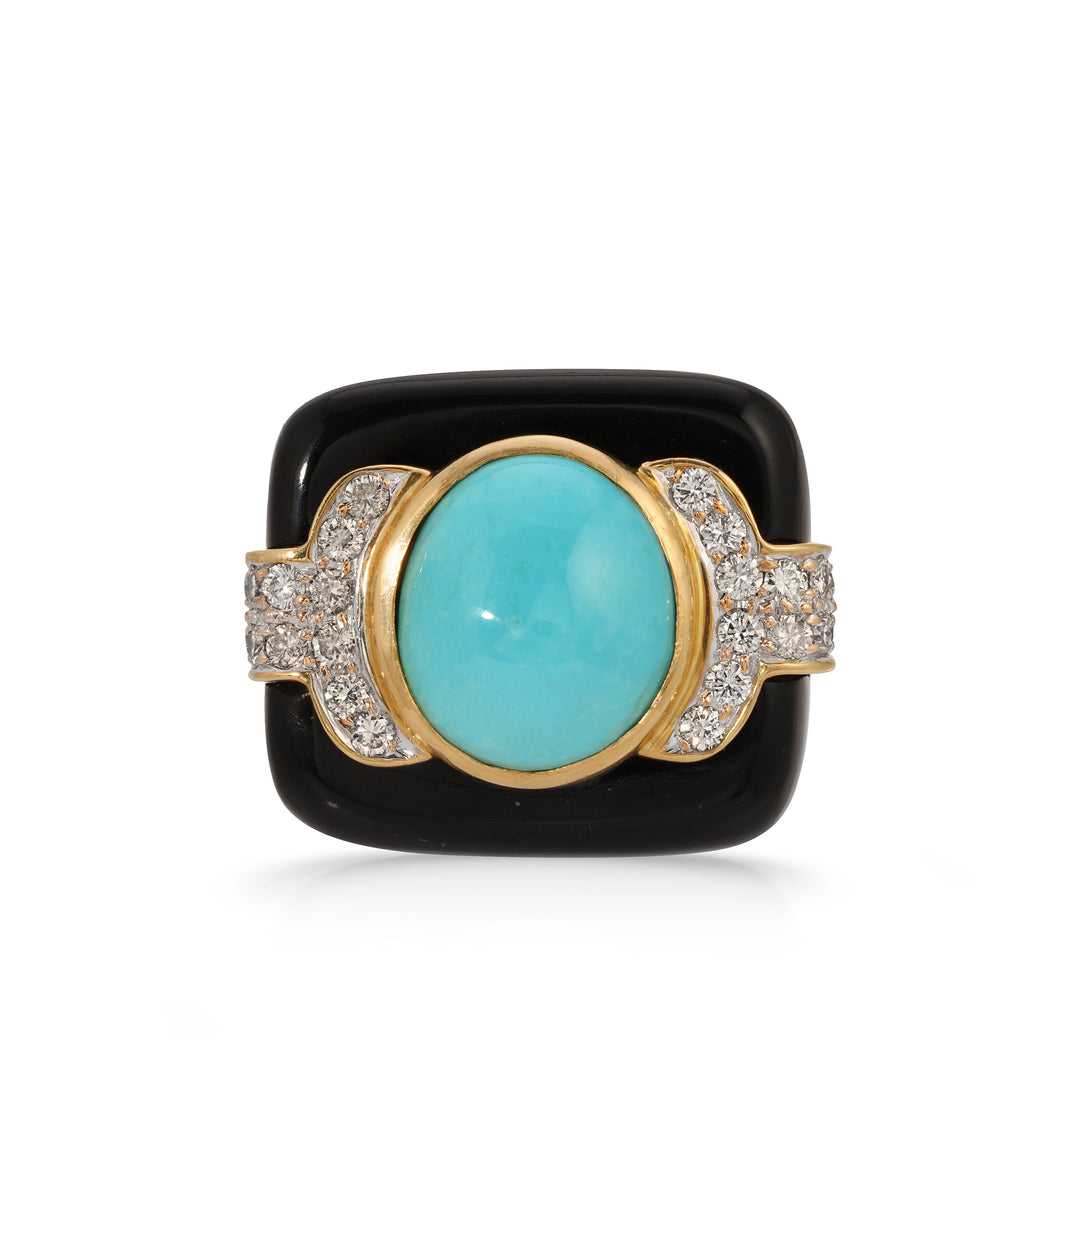 Onyx, Turquoise and Diamond Ring in 14K Gold